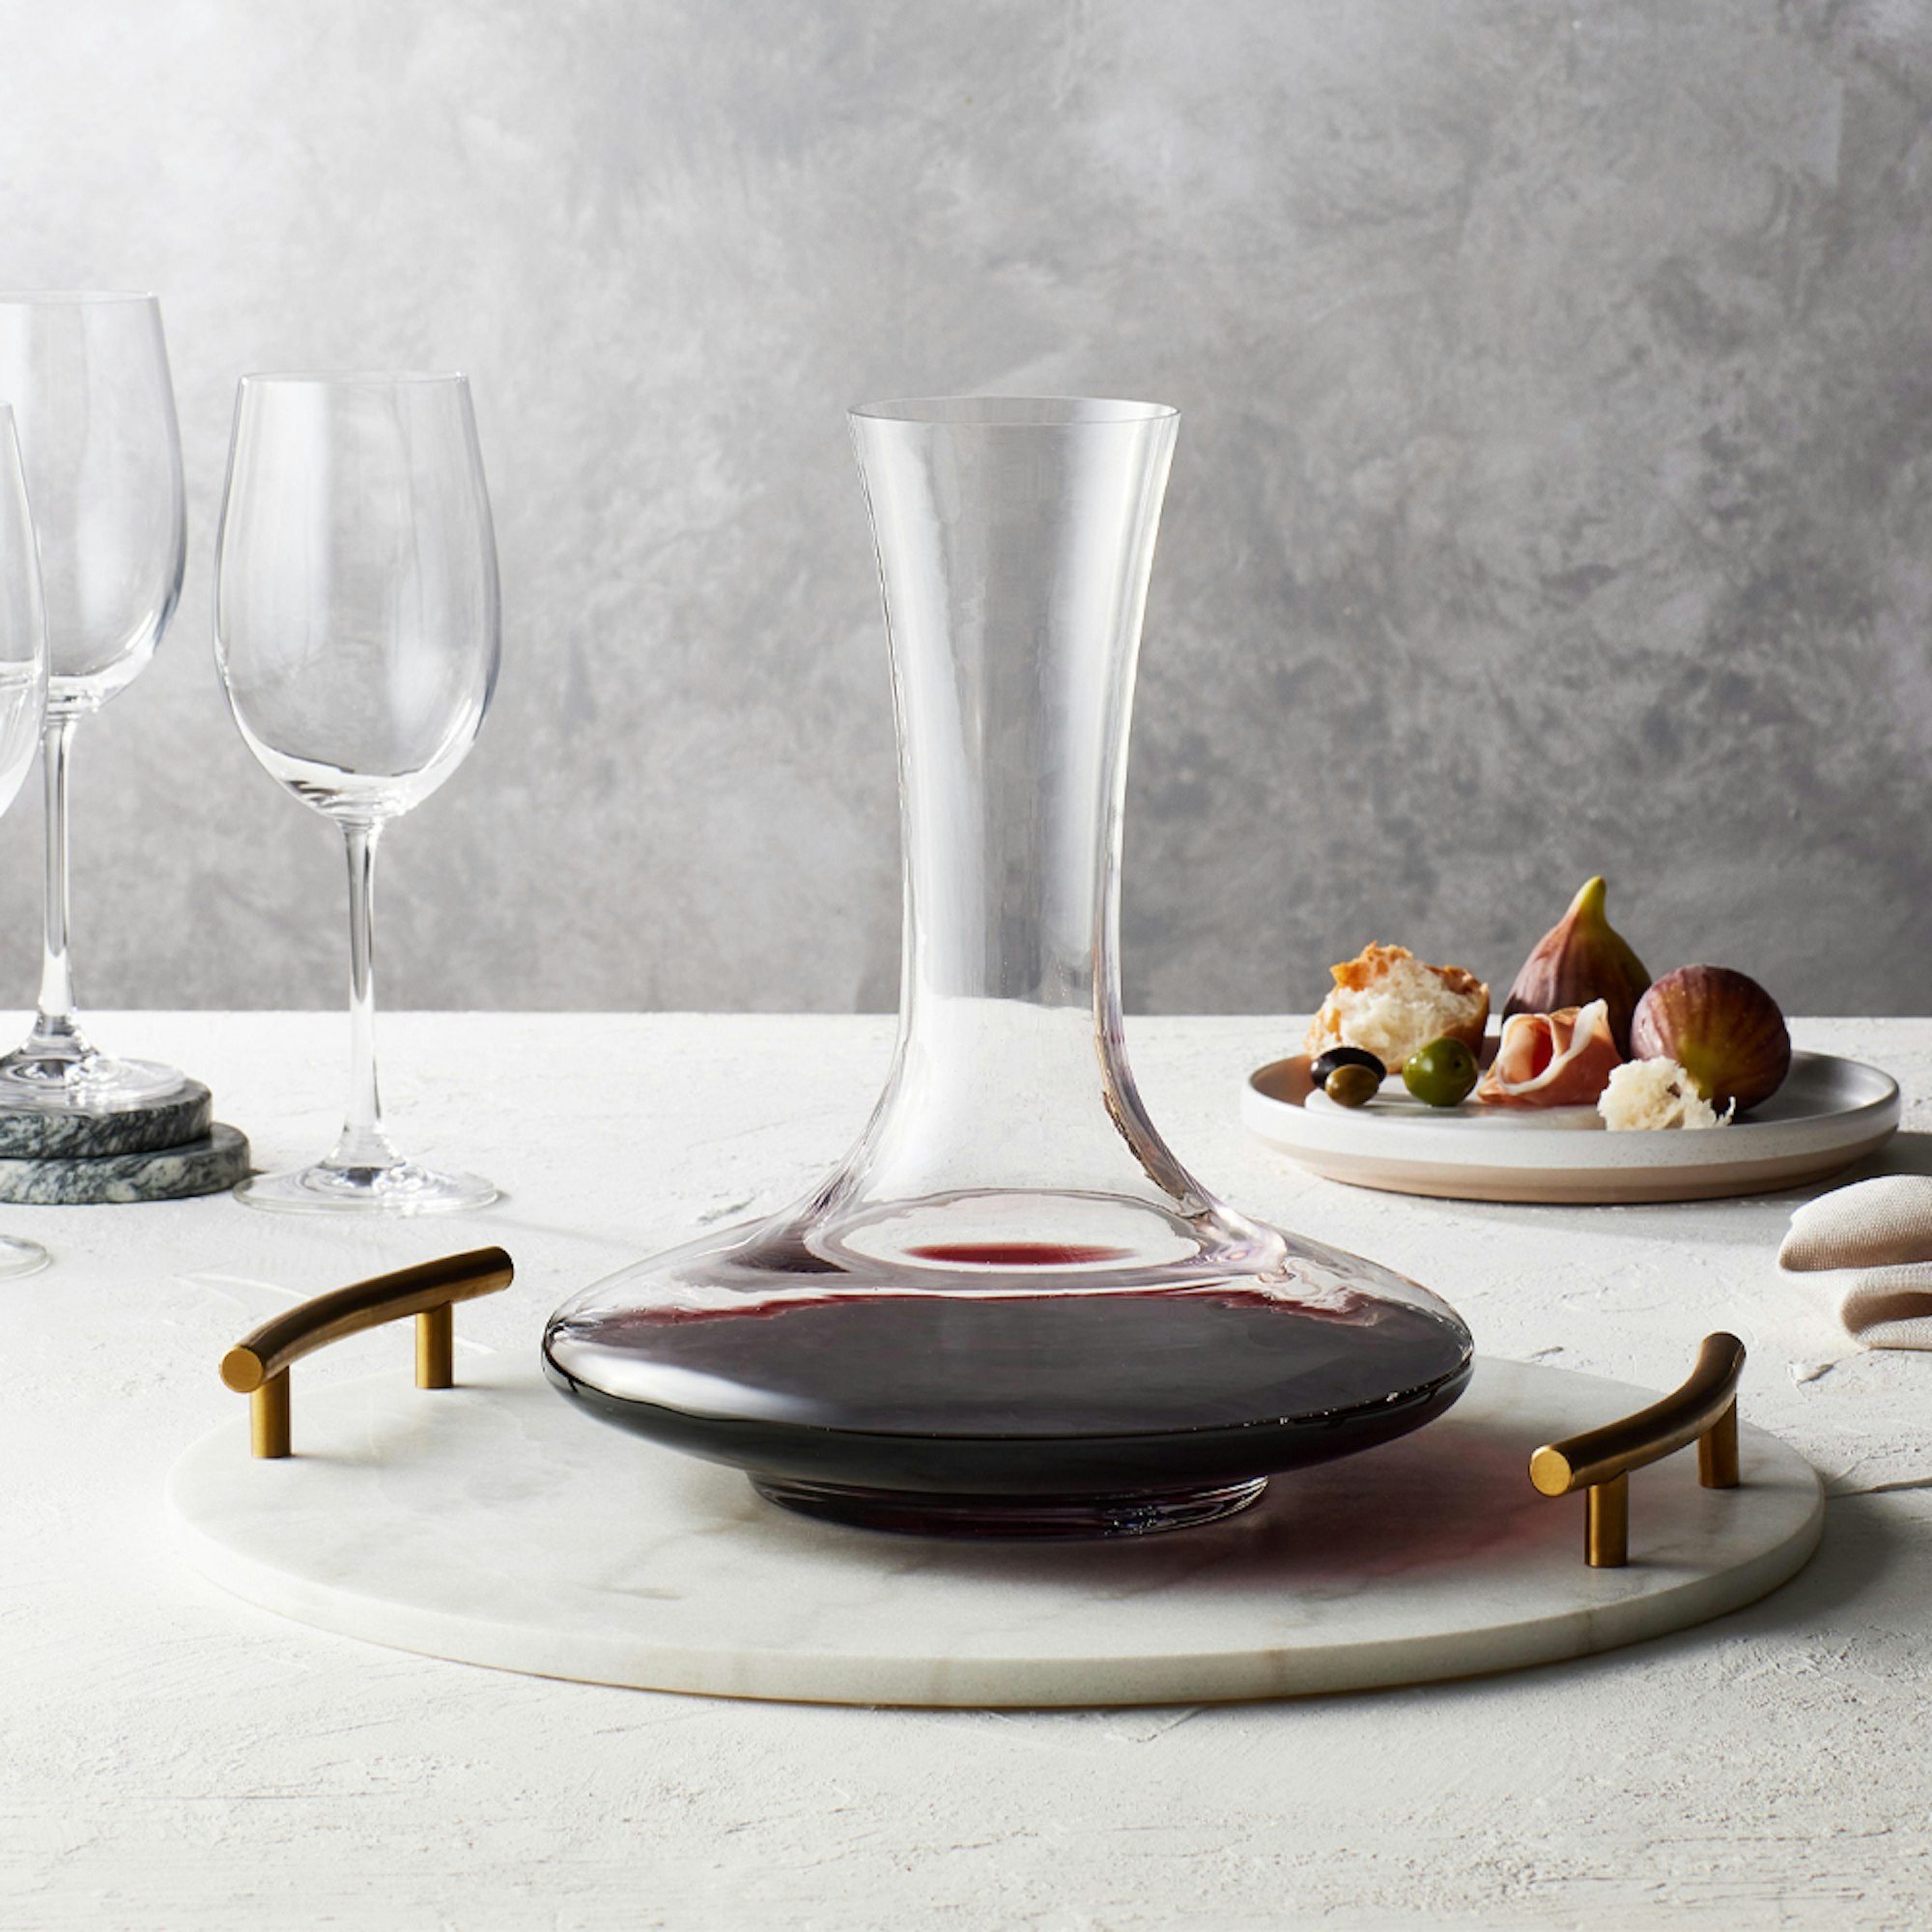 Wine decanter filled with red wine on marble board with glasses and fruit